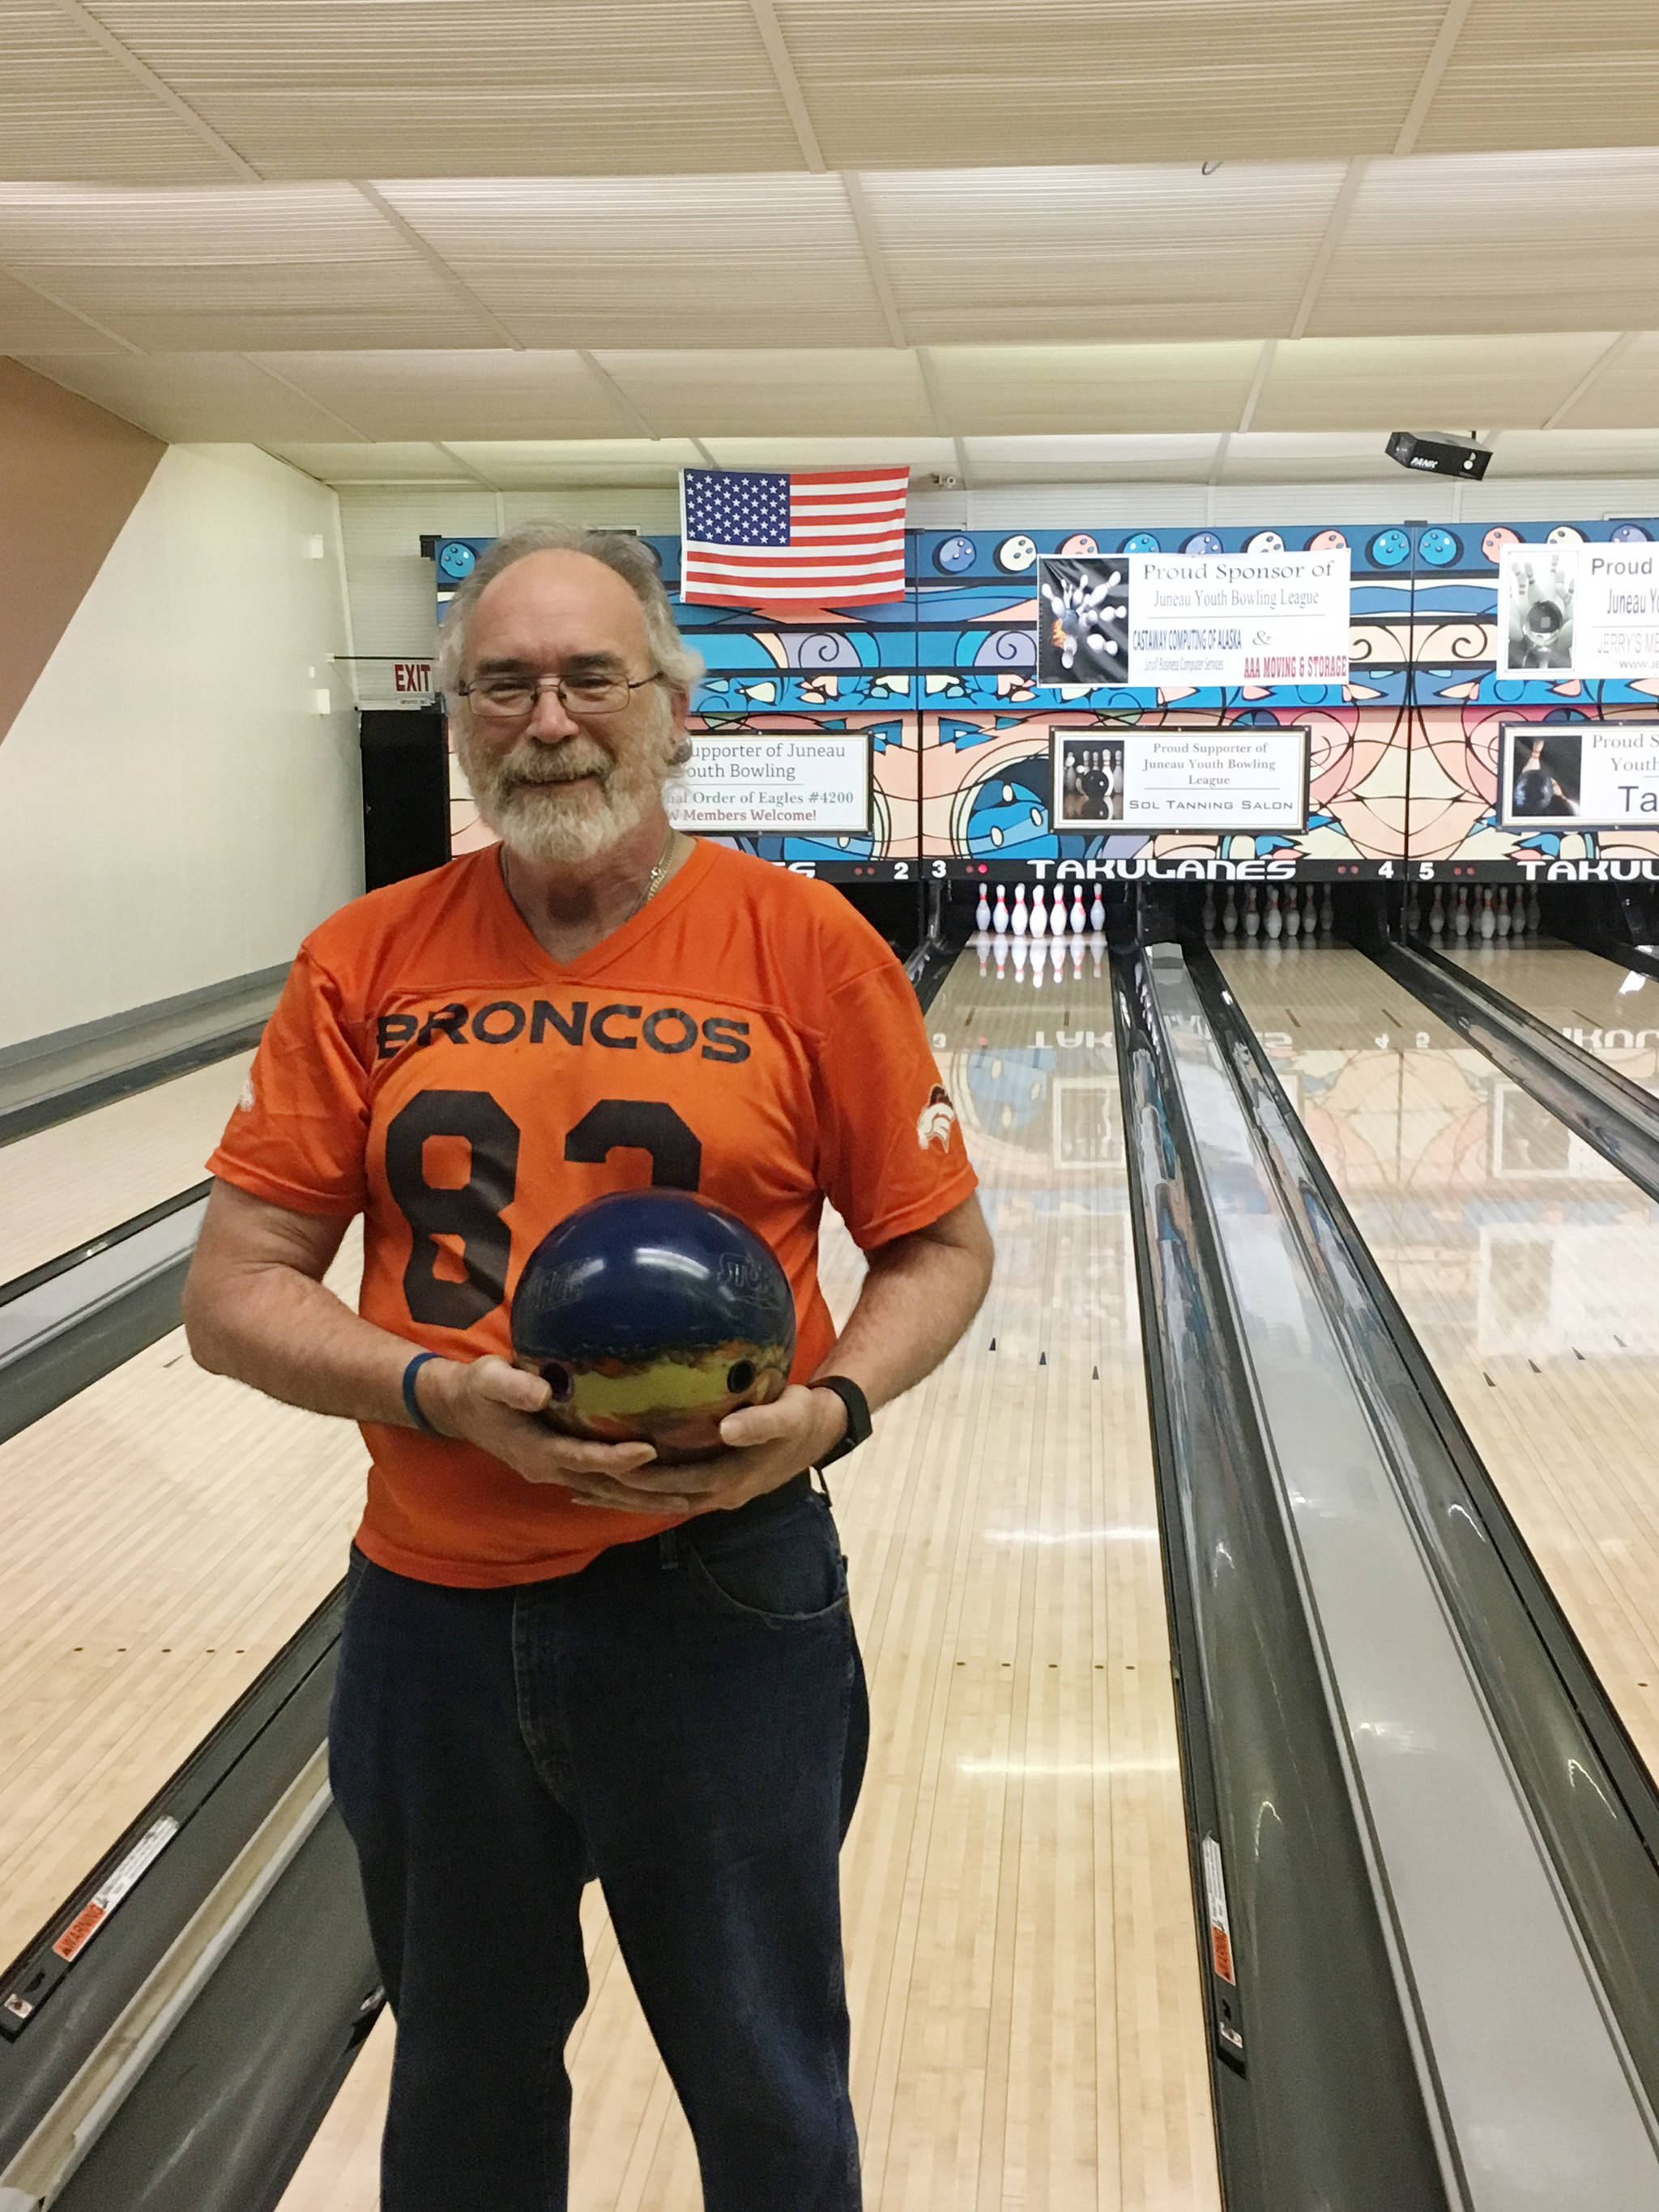 Keith Brundige, 59, poses with his lucky ball after bowling a perfect game of 300 on Sunday at Taku Lanes. (Courtesy Photo | Tim Powers)